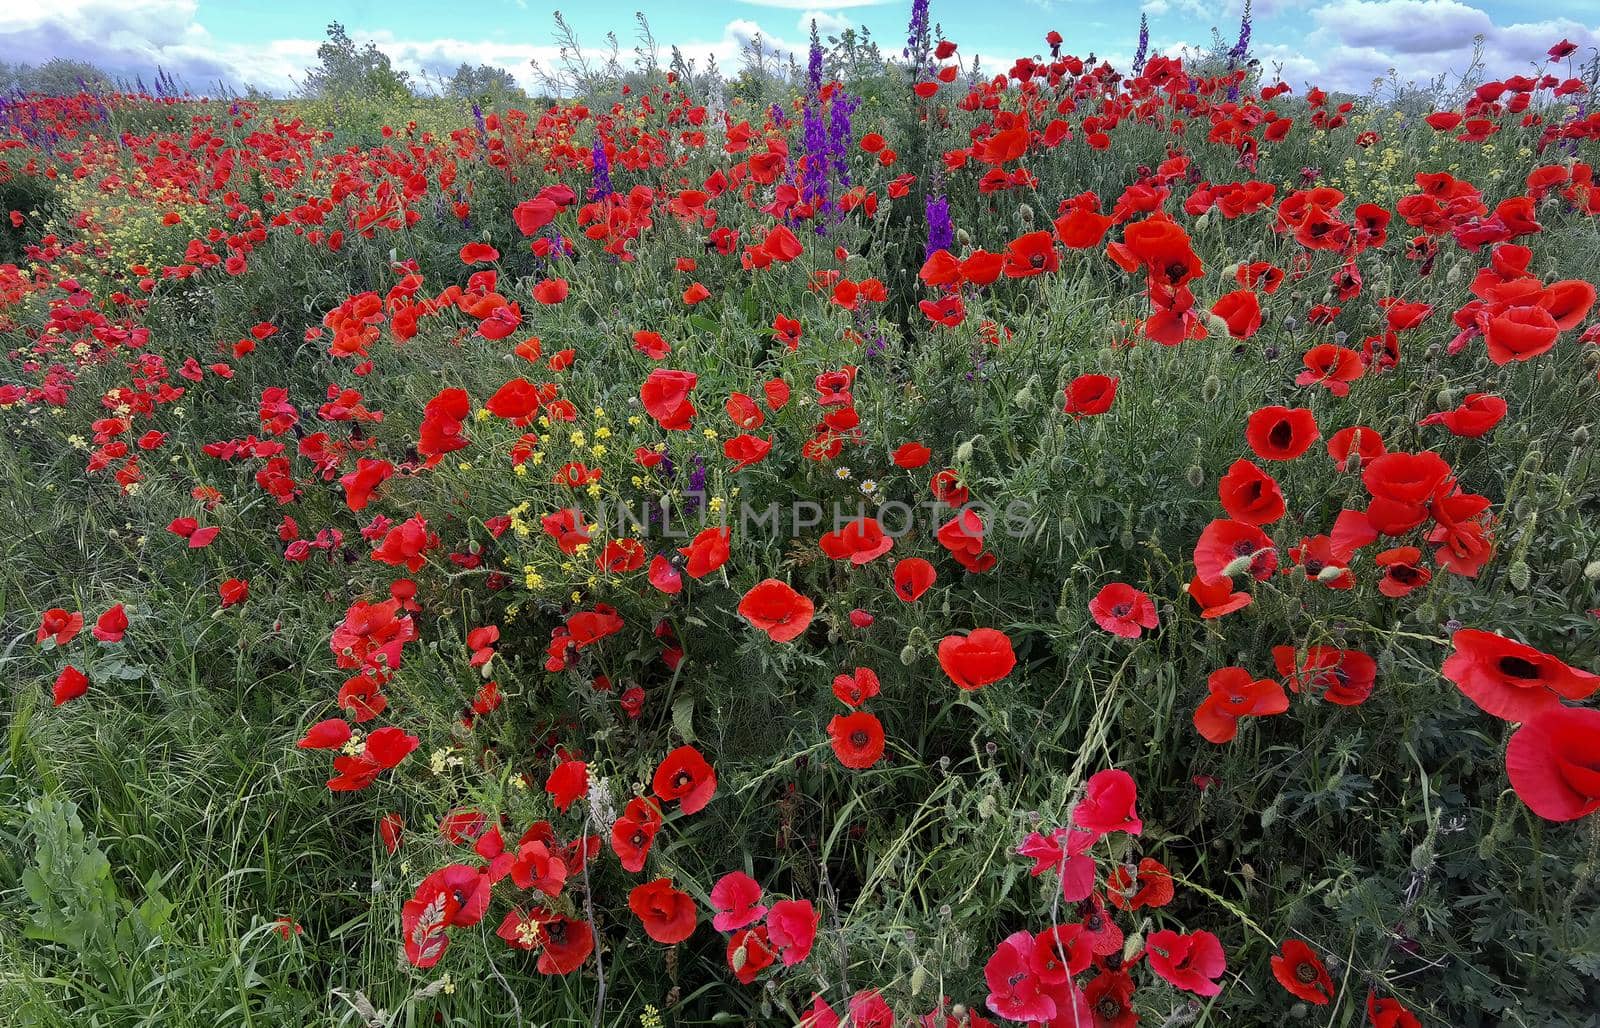 Purple flowers and poppies bloom in the wild fields. Beautiful rural flowers. by EdVal